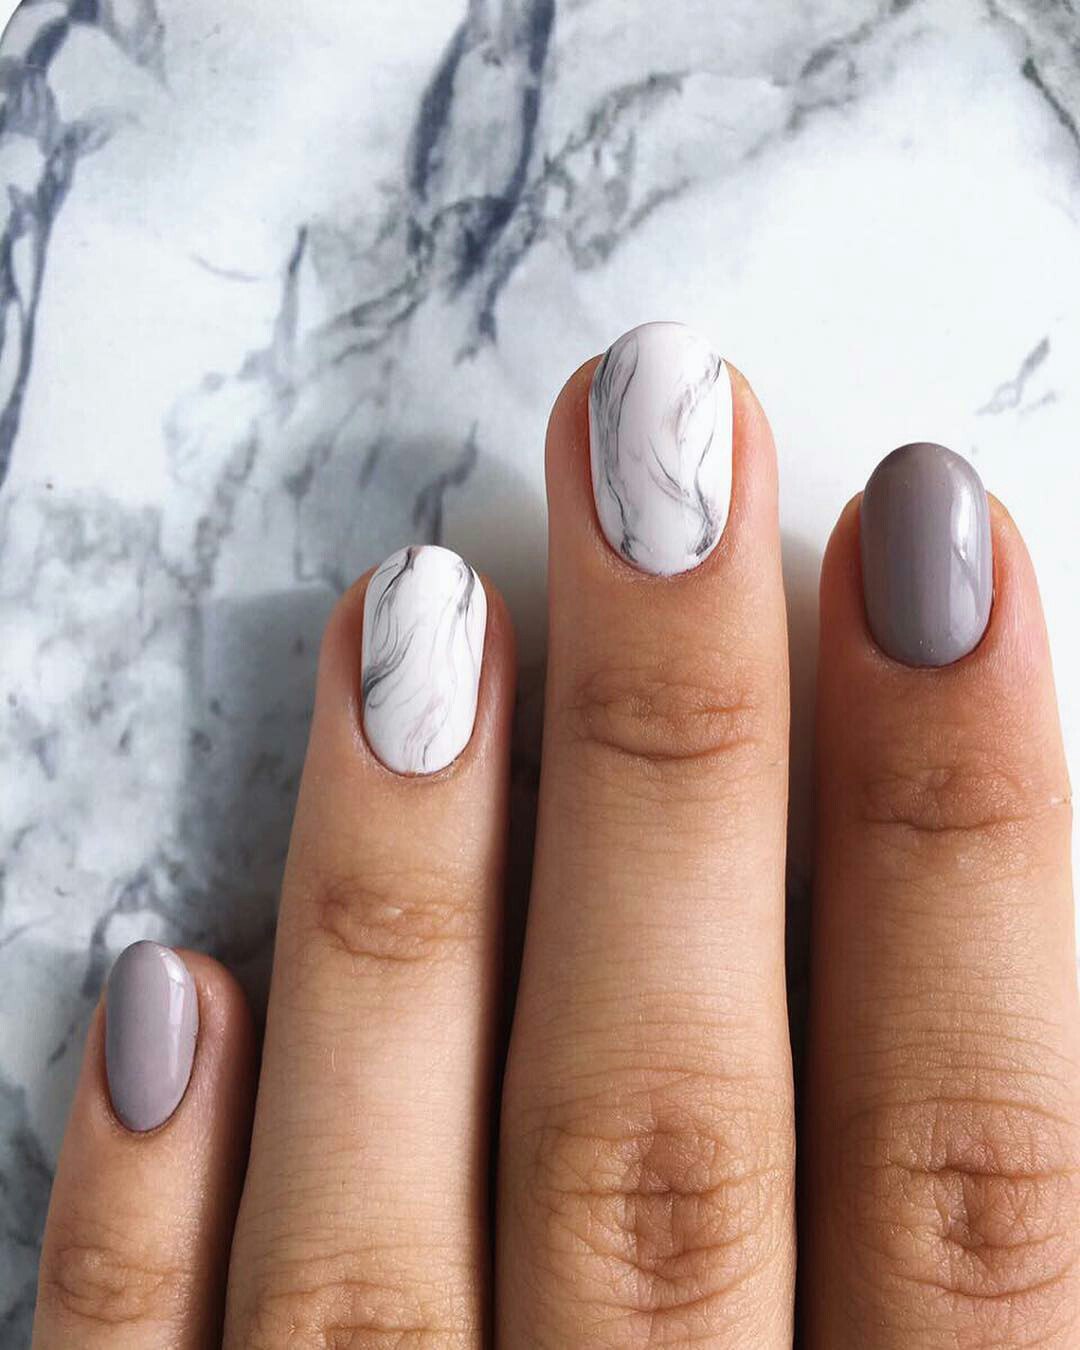 Water Nail Art: How to Do Water Marble Nail Art - LadyLife